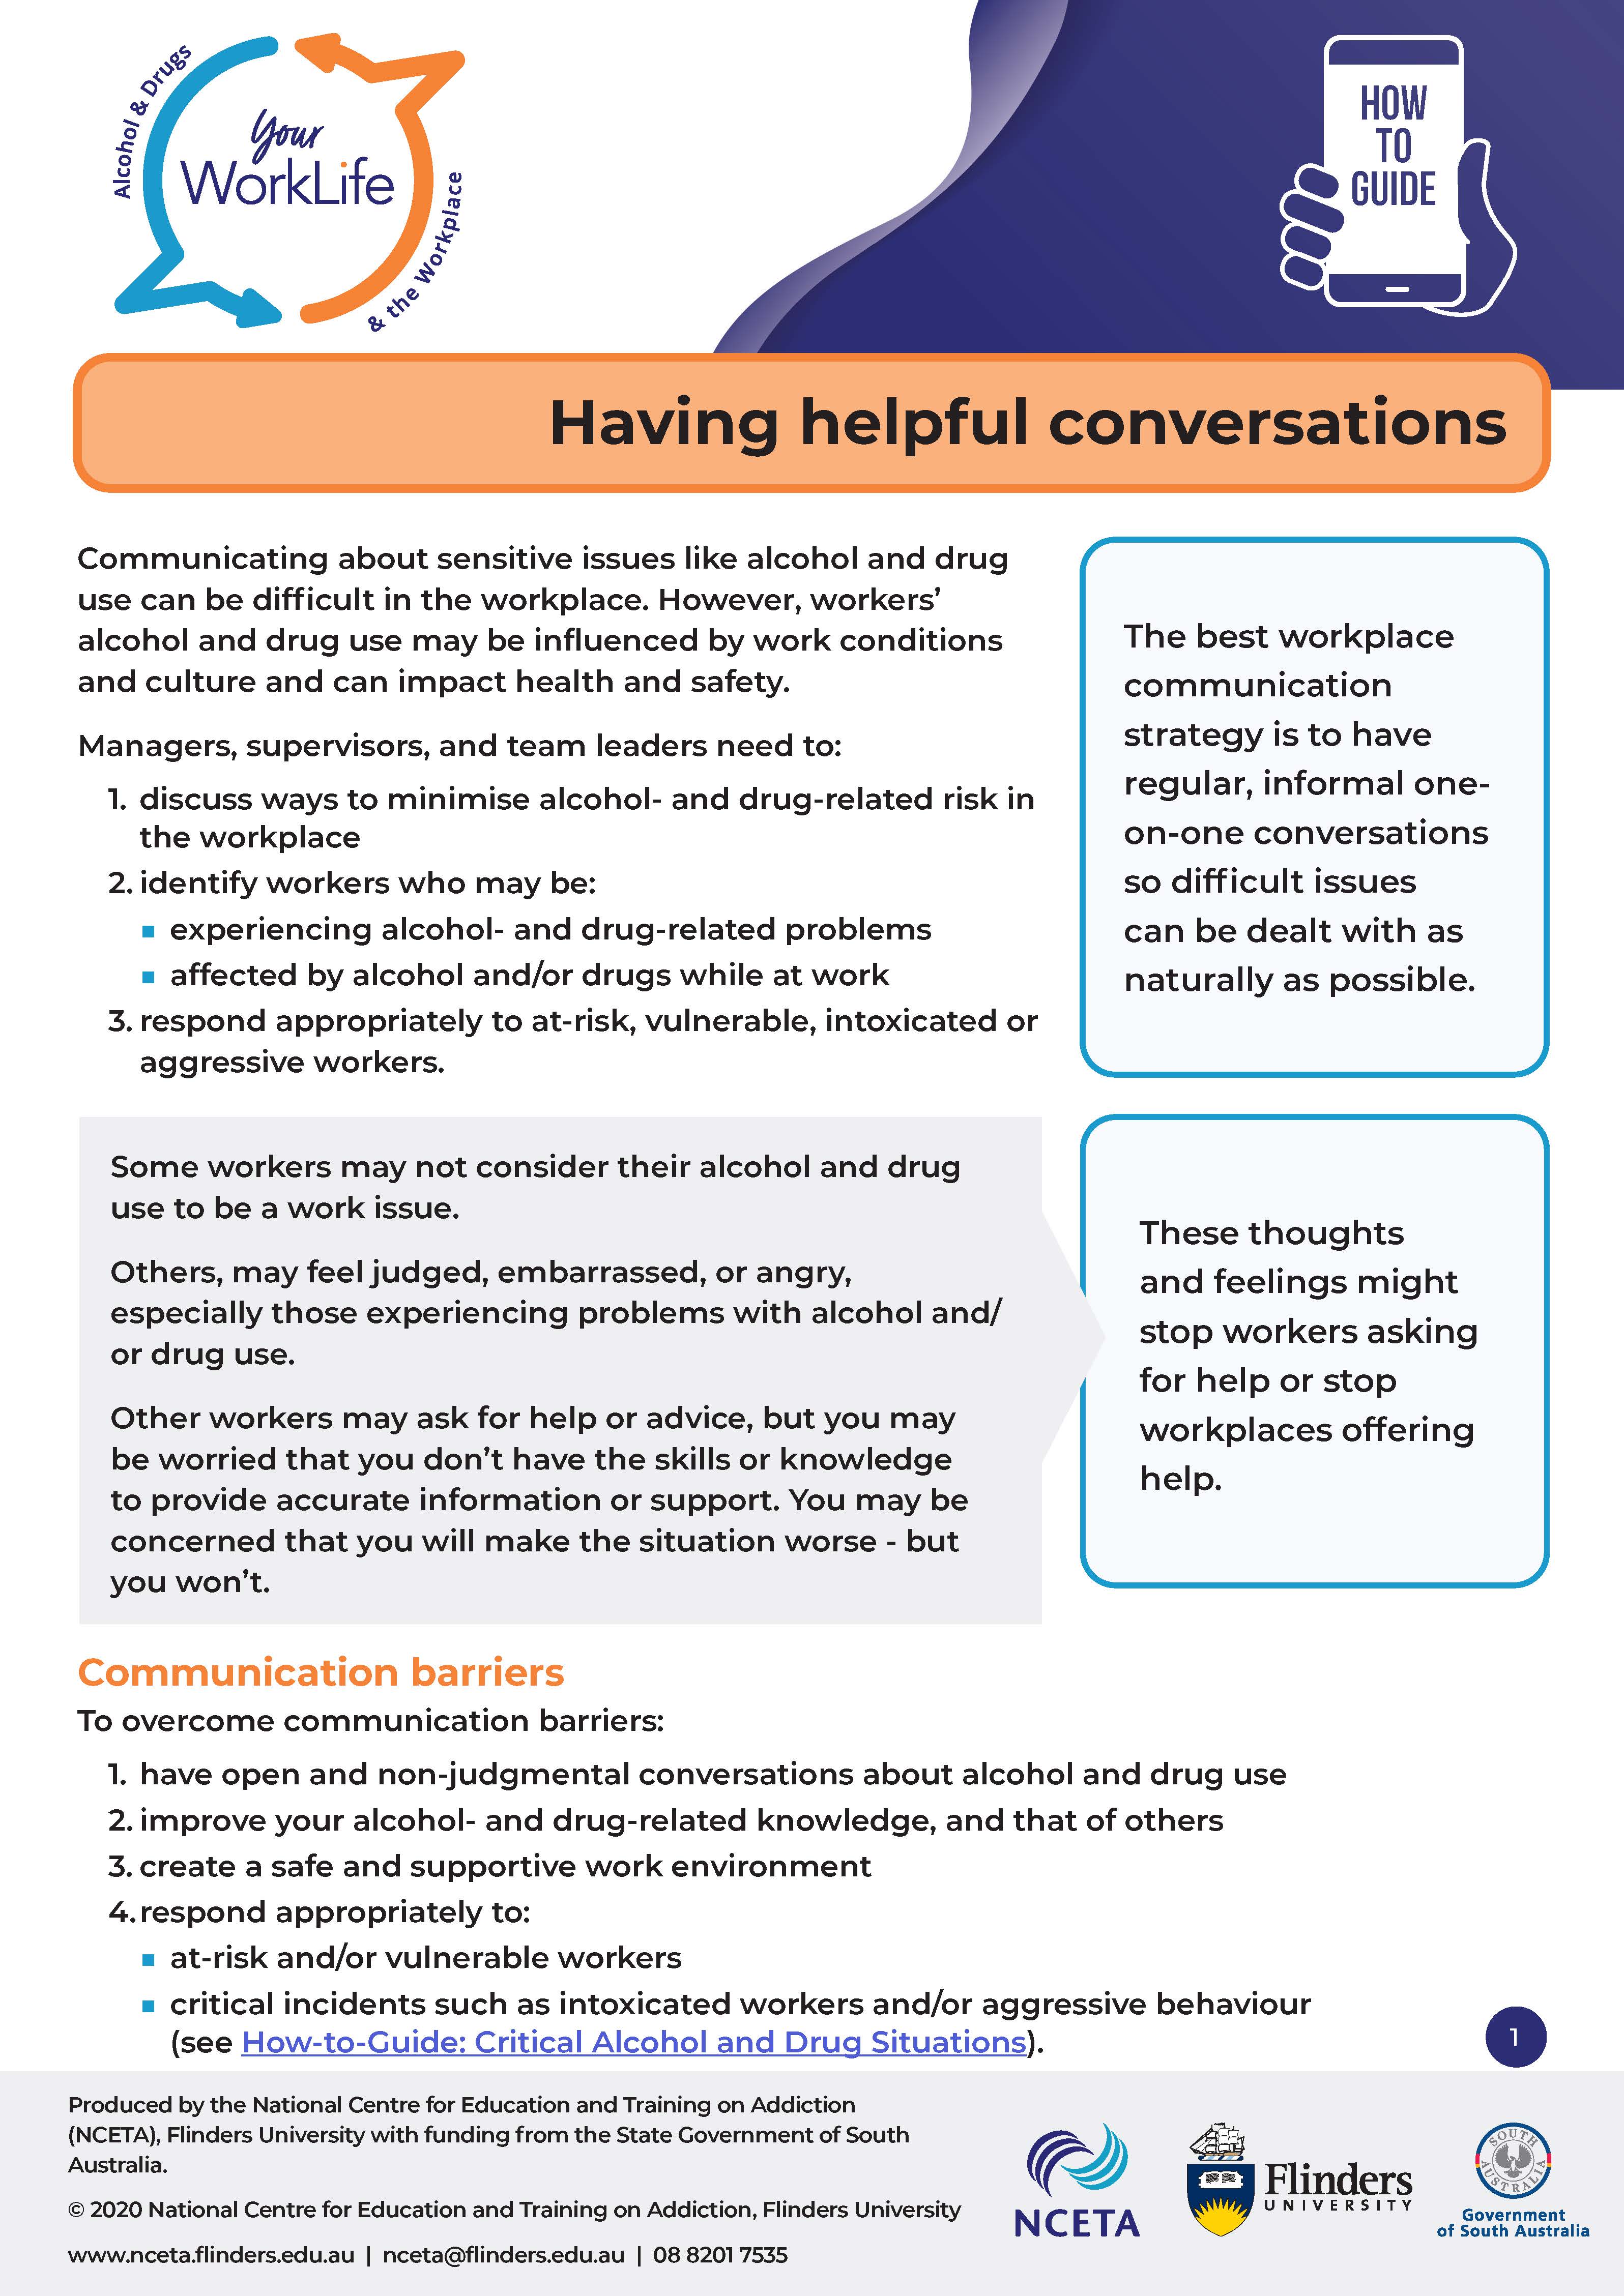 Front page-How to Guide-Helpful conversations 20200505.jpg